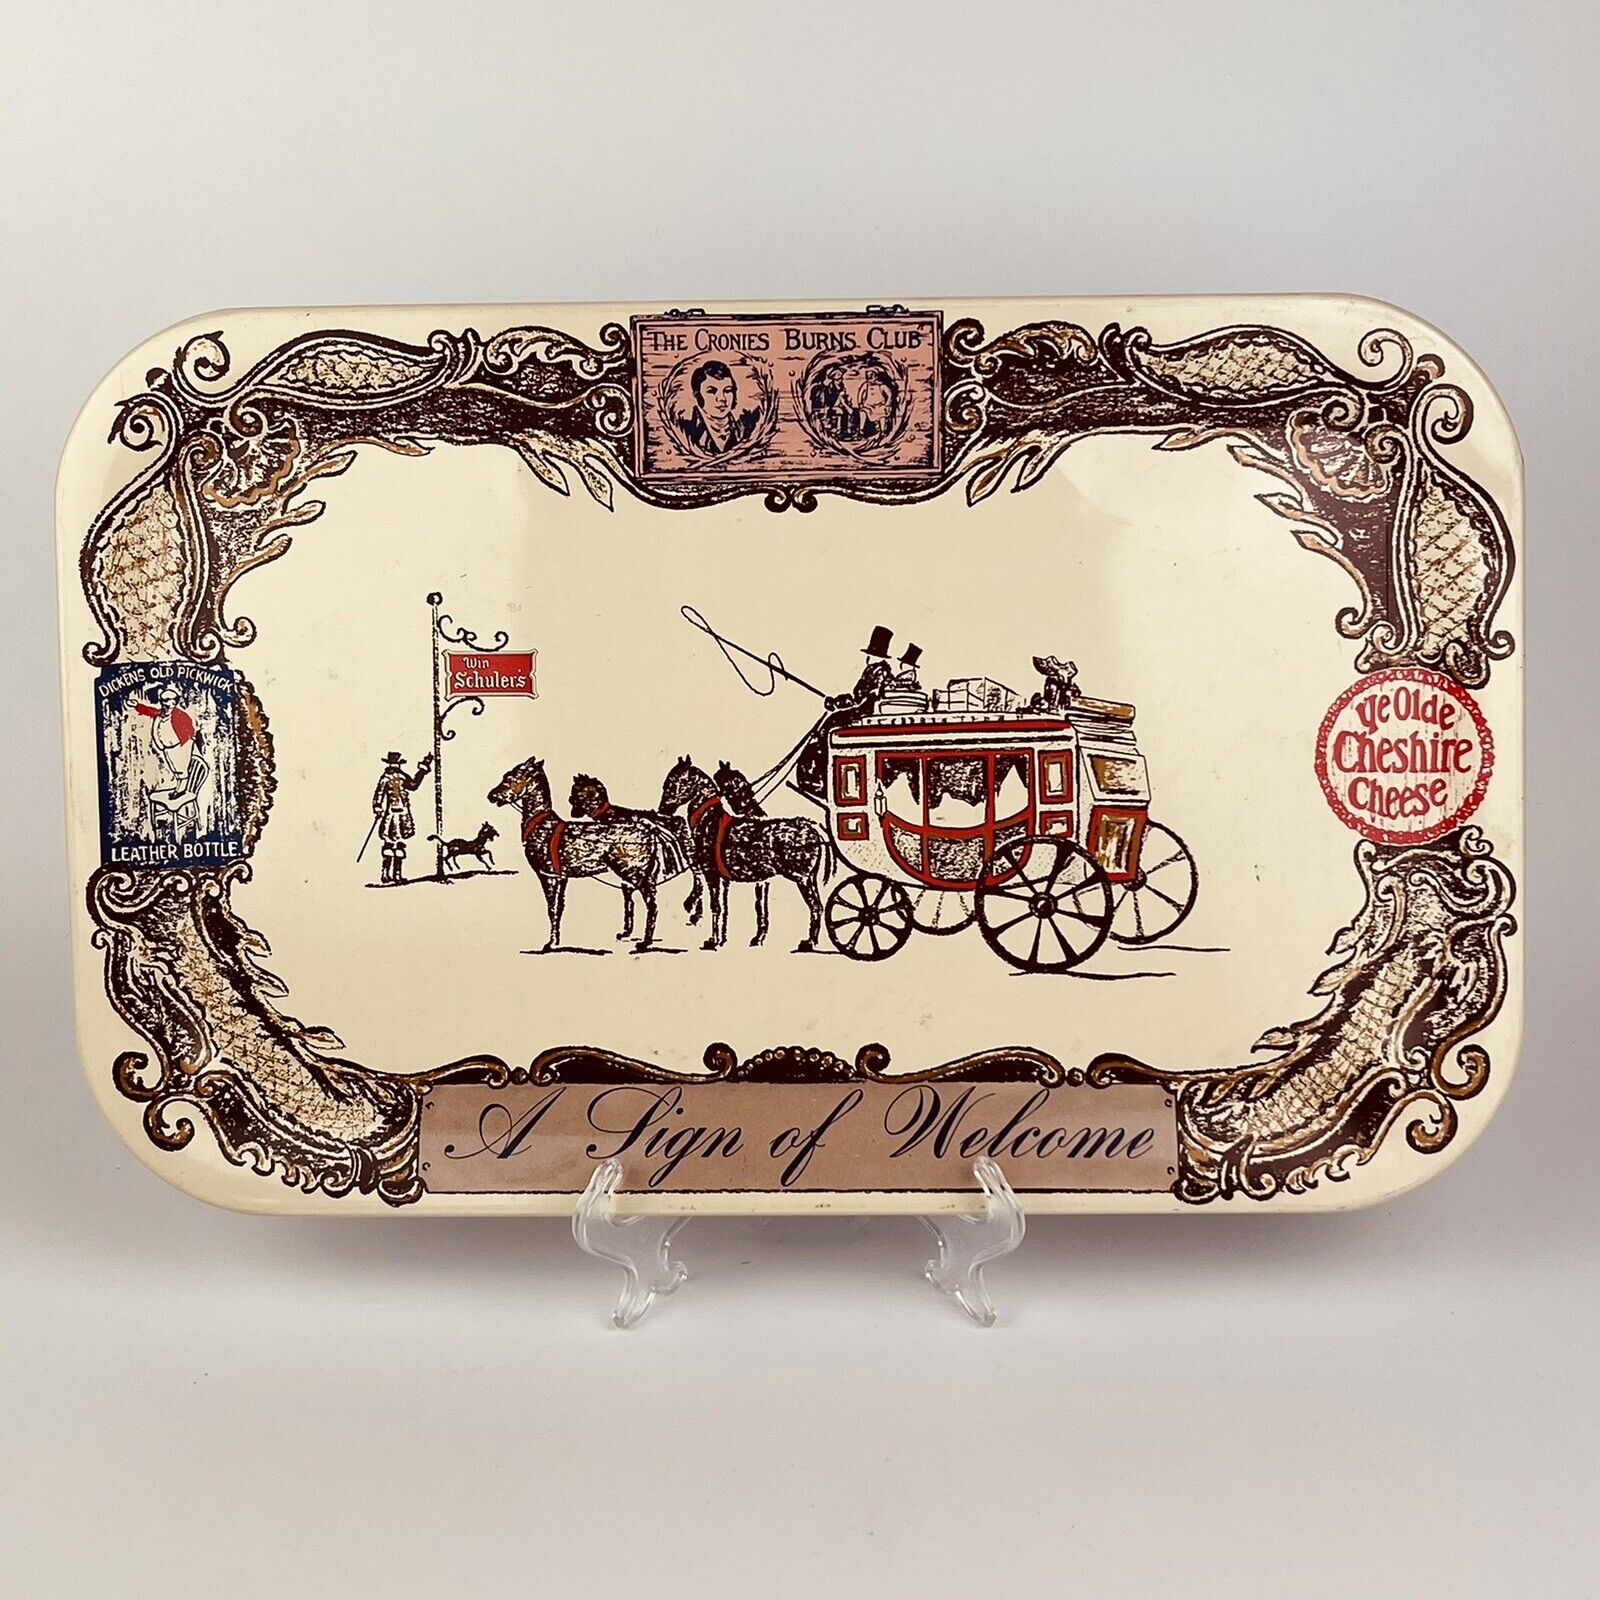 Vintage Decorative Metal Tray Featuring Inns Of Great Tradition, English Hotels